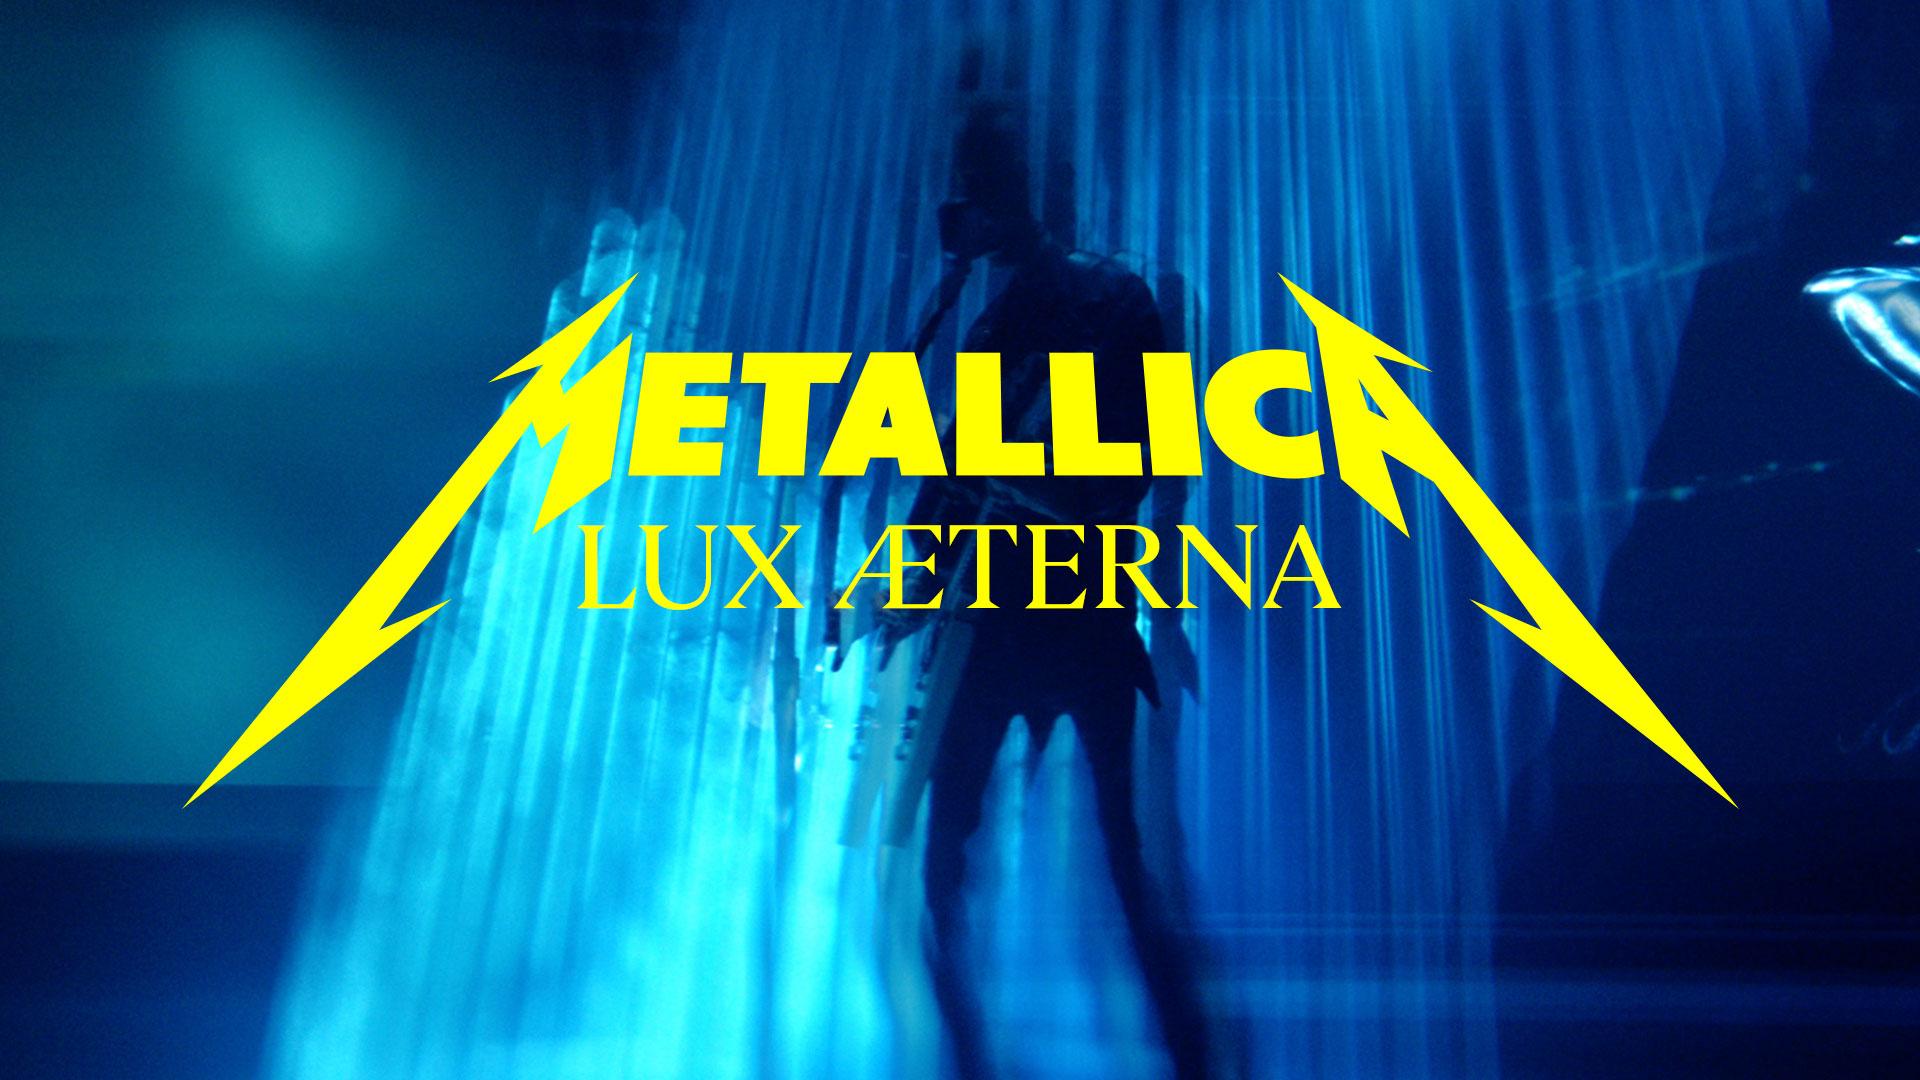 Watch Metallica's official music video for "Lux Æterna" from the album "72 Seasons"